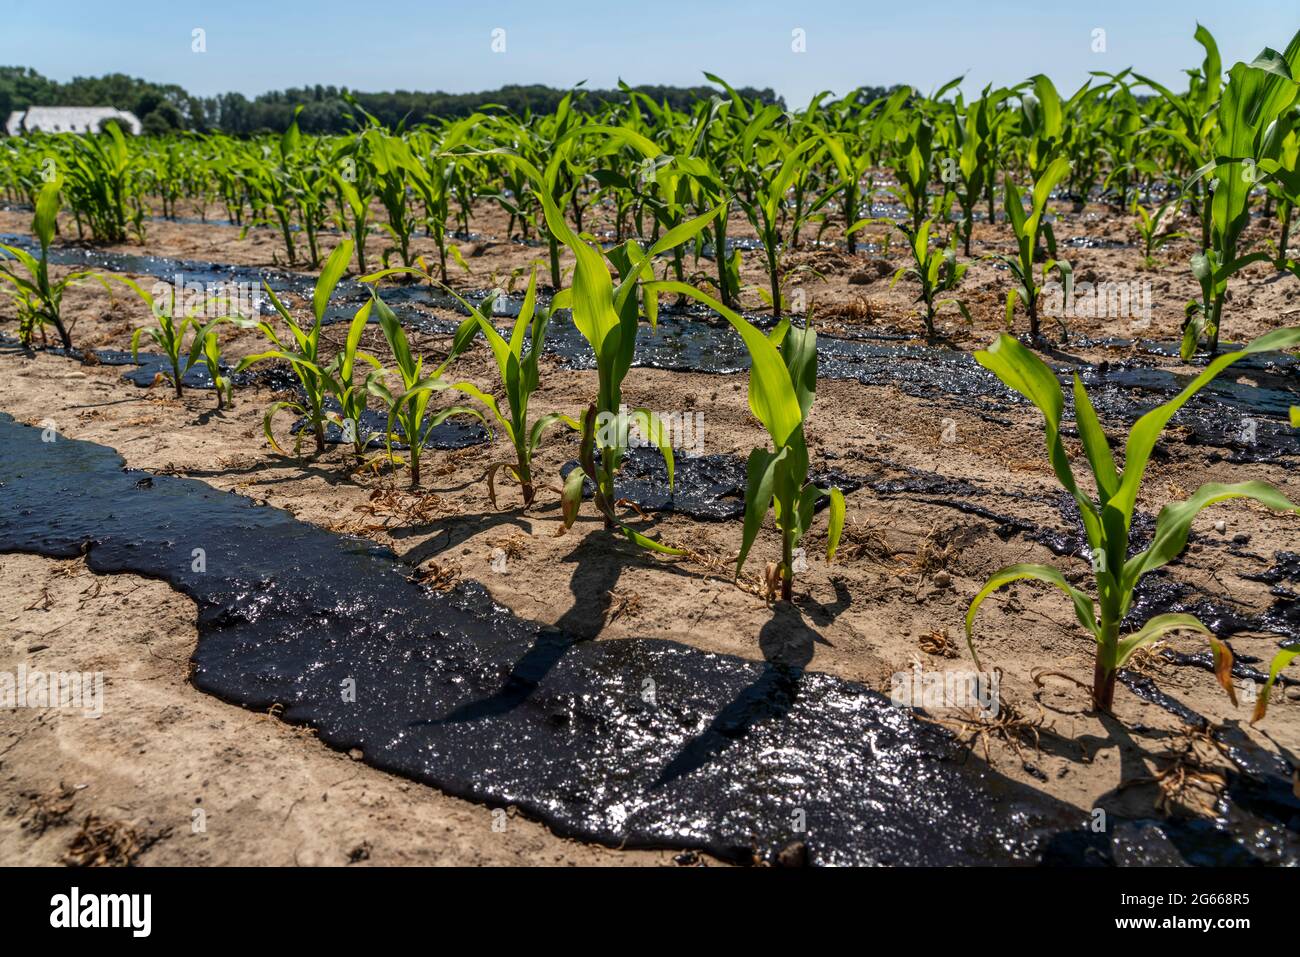 A maize field, with young plants, is fertilised with manure, near Geldern, NRW, Germany, Stock Photo